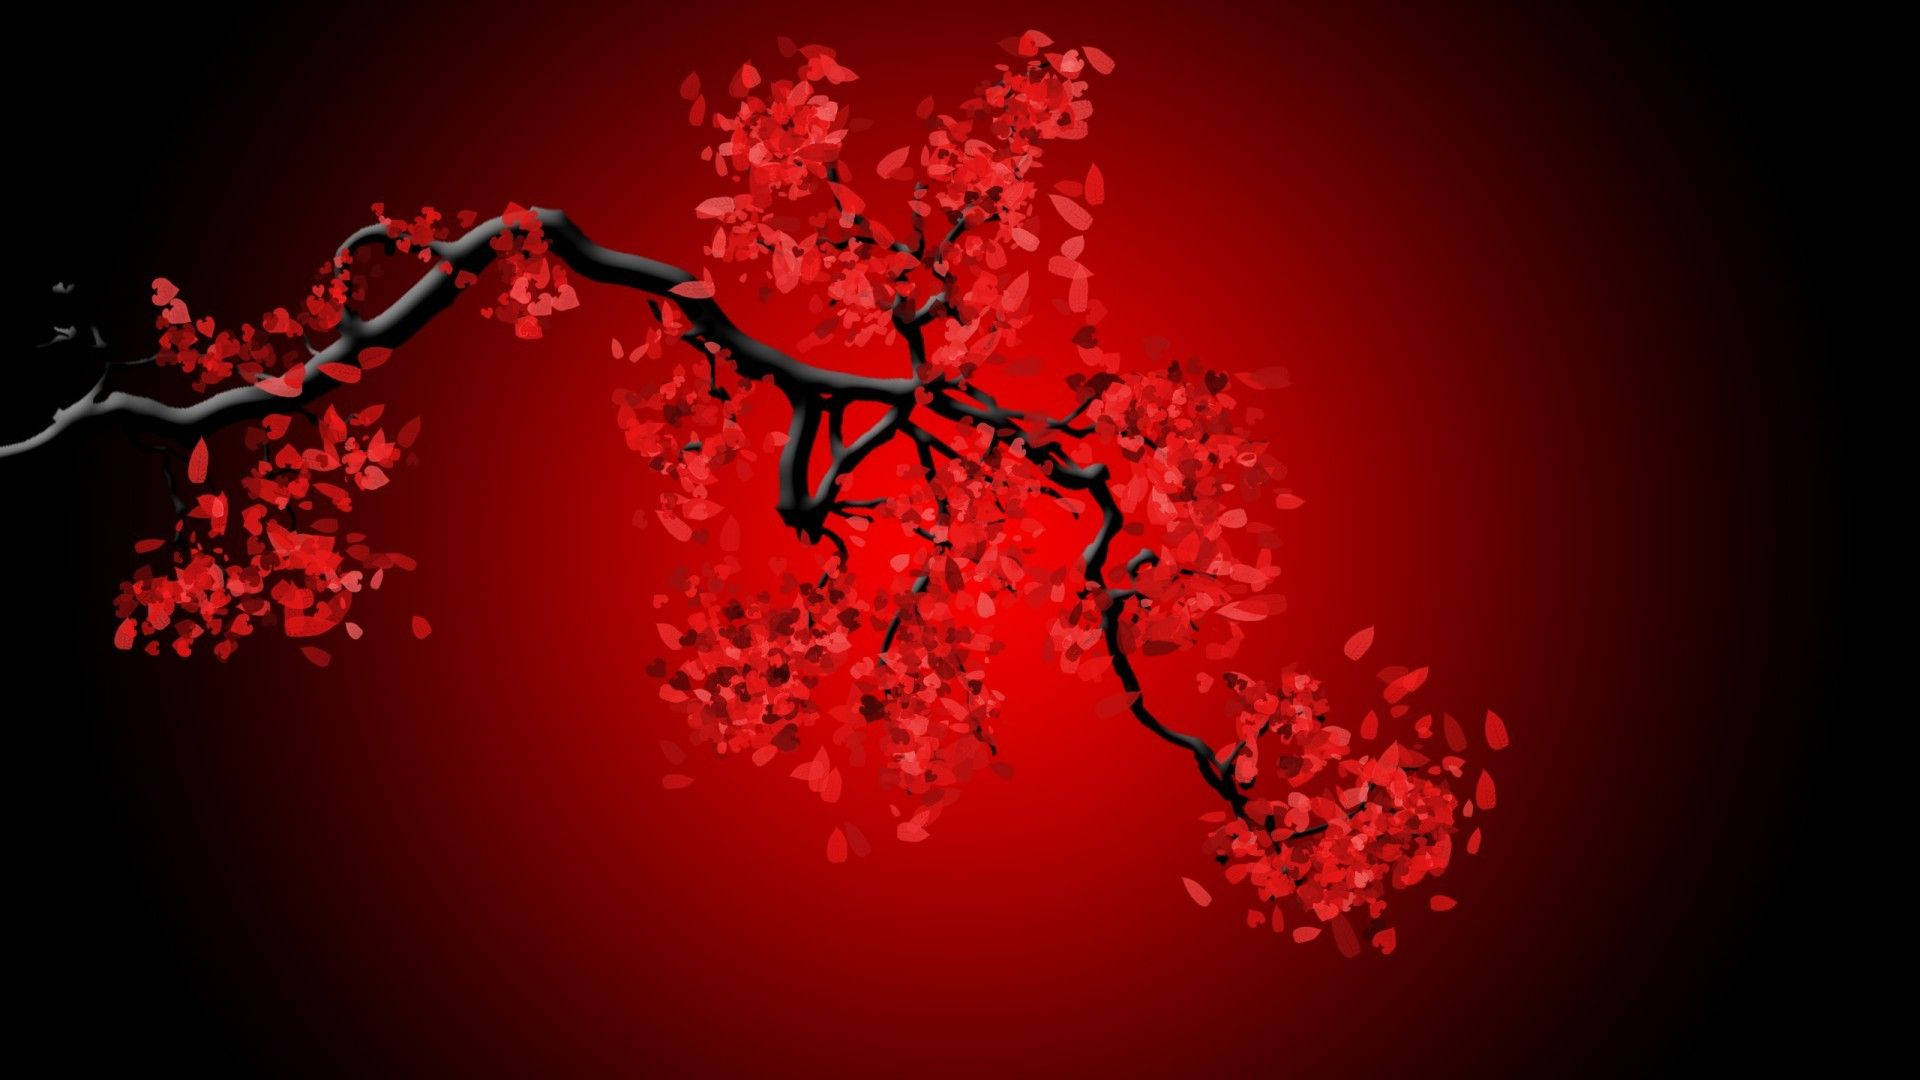 Download Cool Red Cherry Blossom Wallpaper